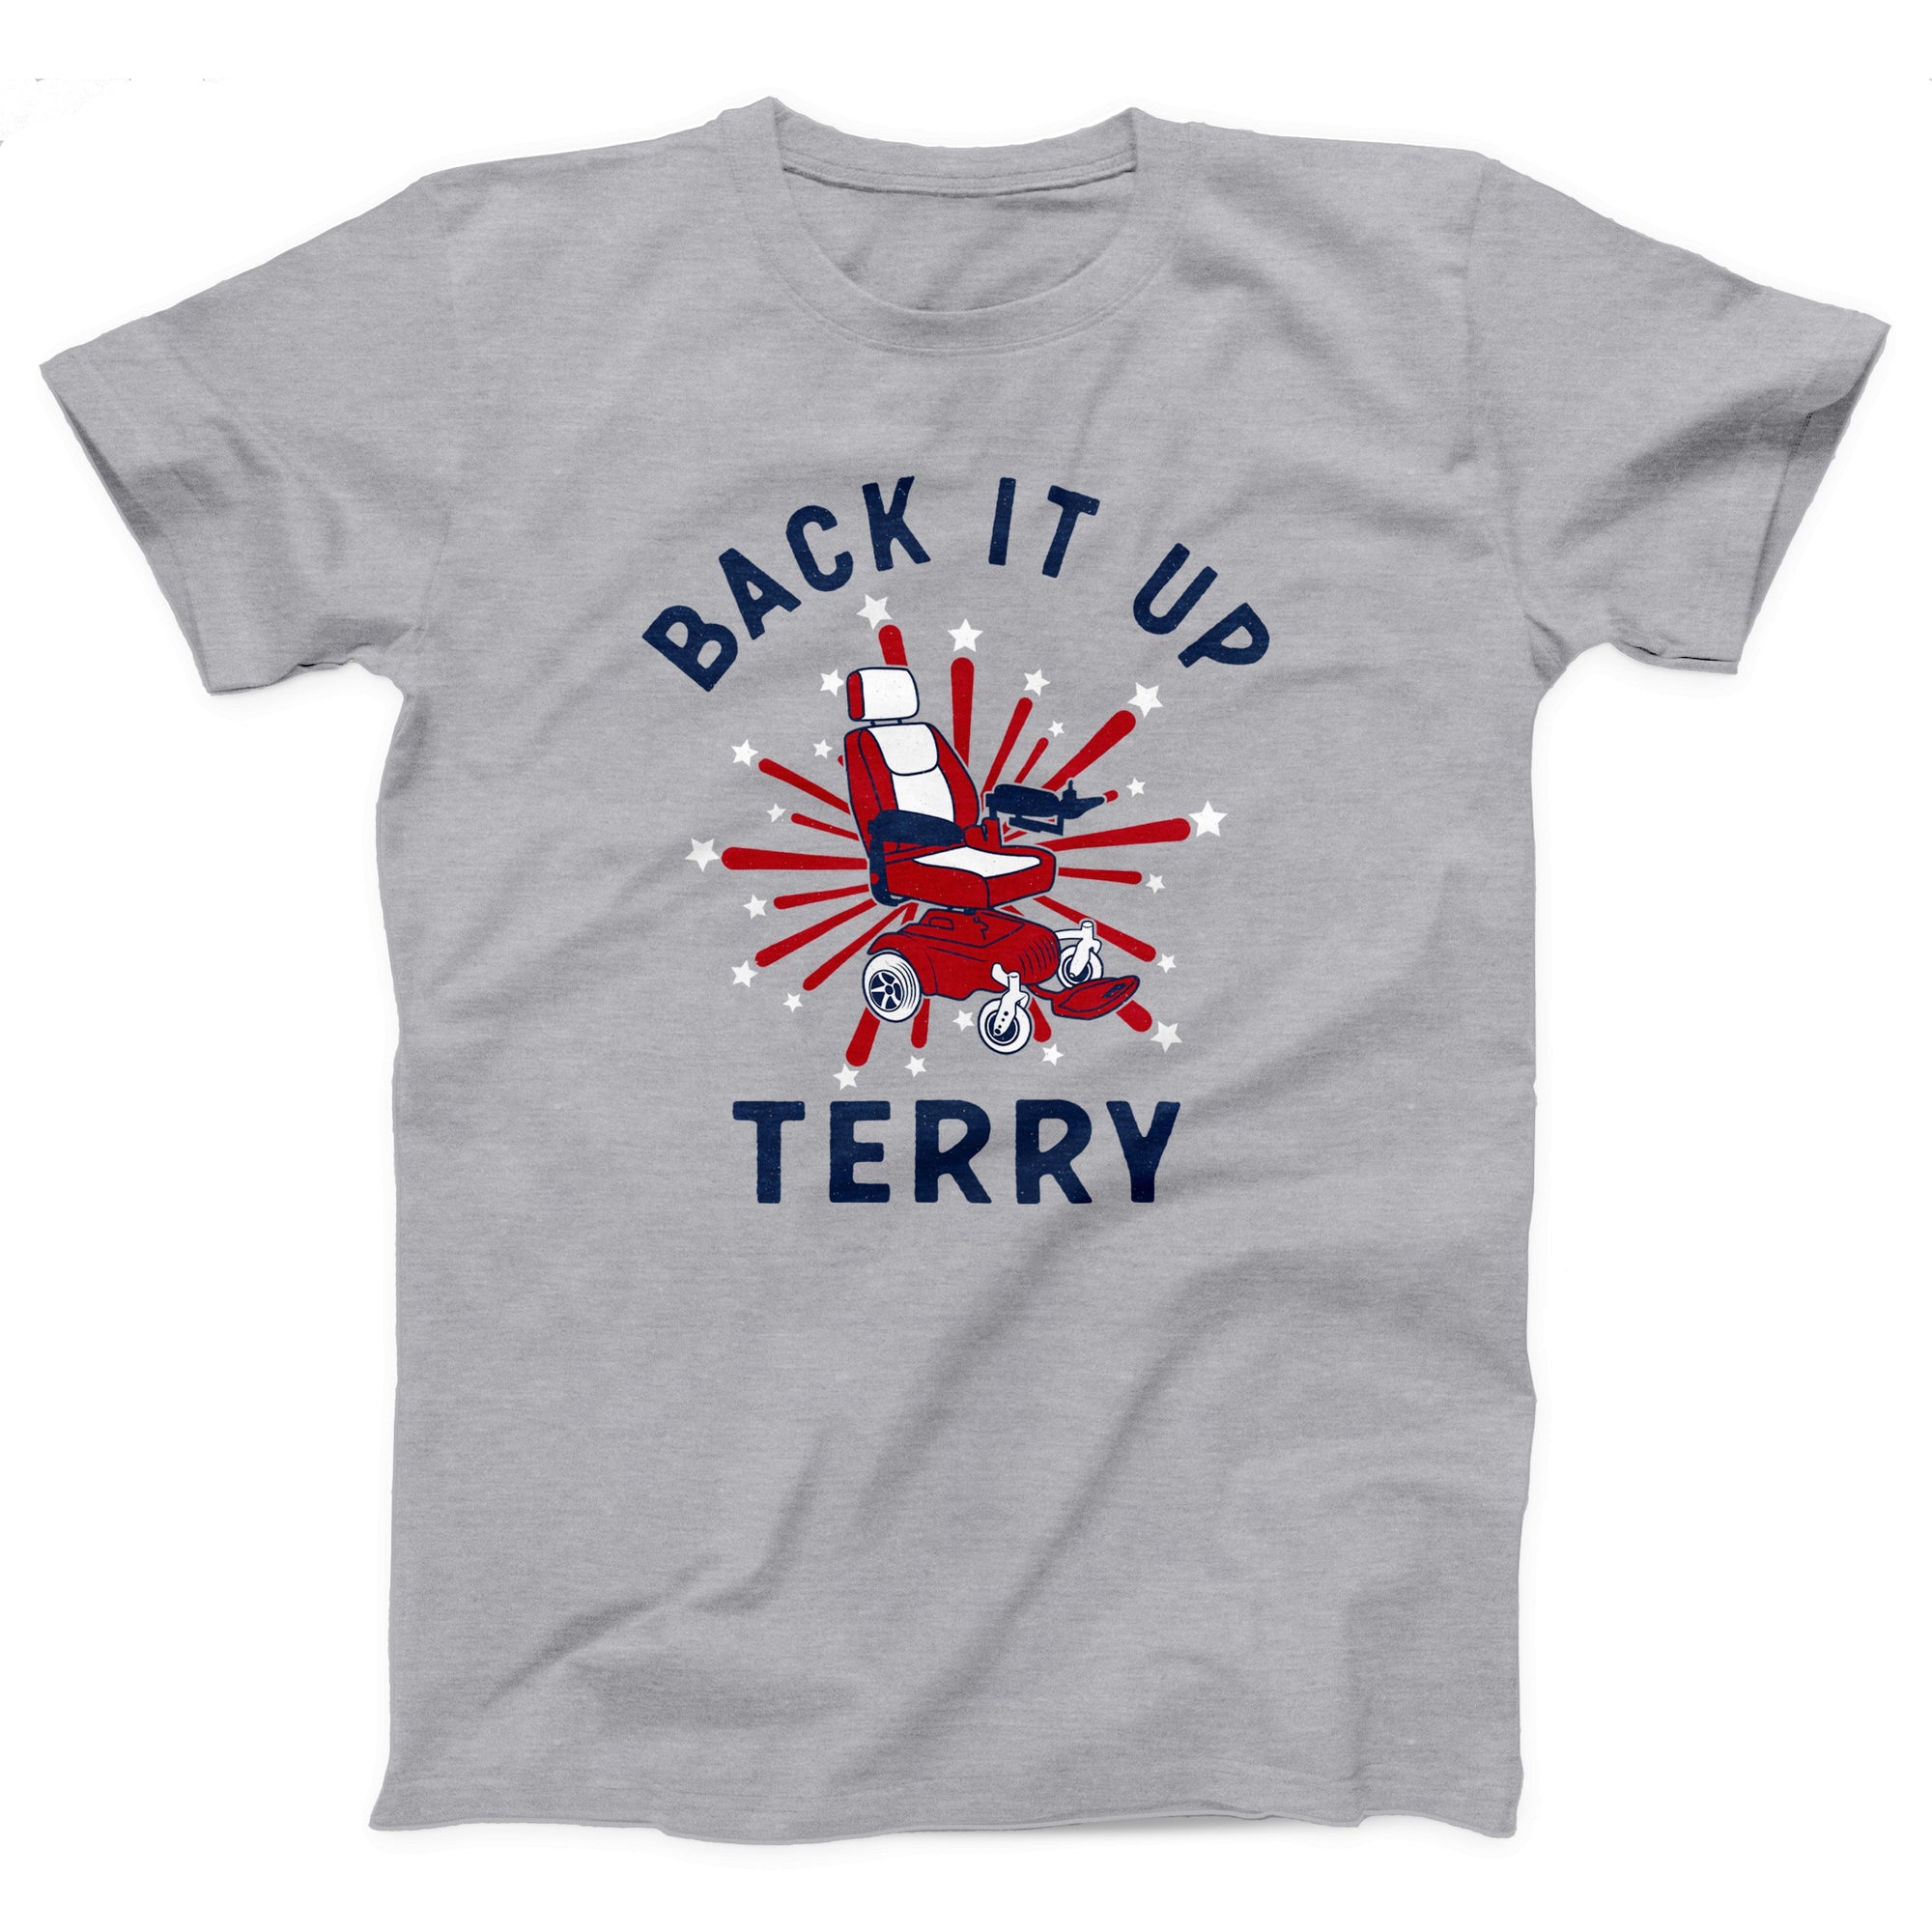 Back It Up Terry Adult Unisex T-Shirt